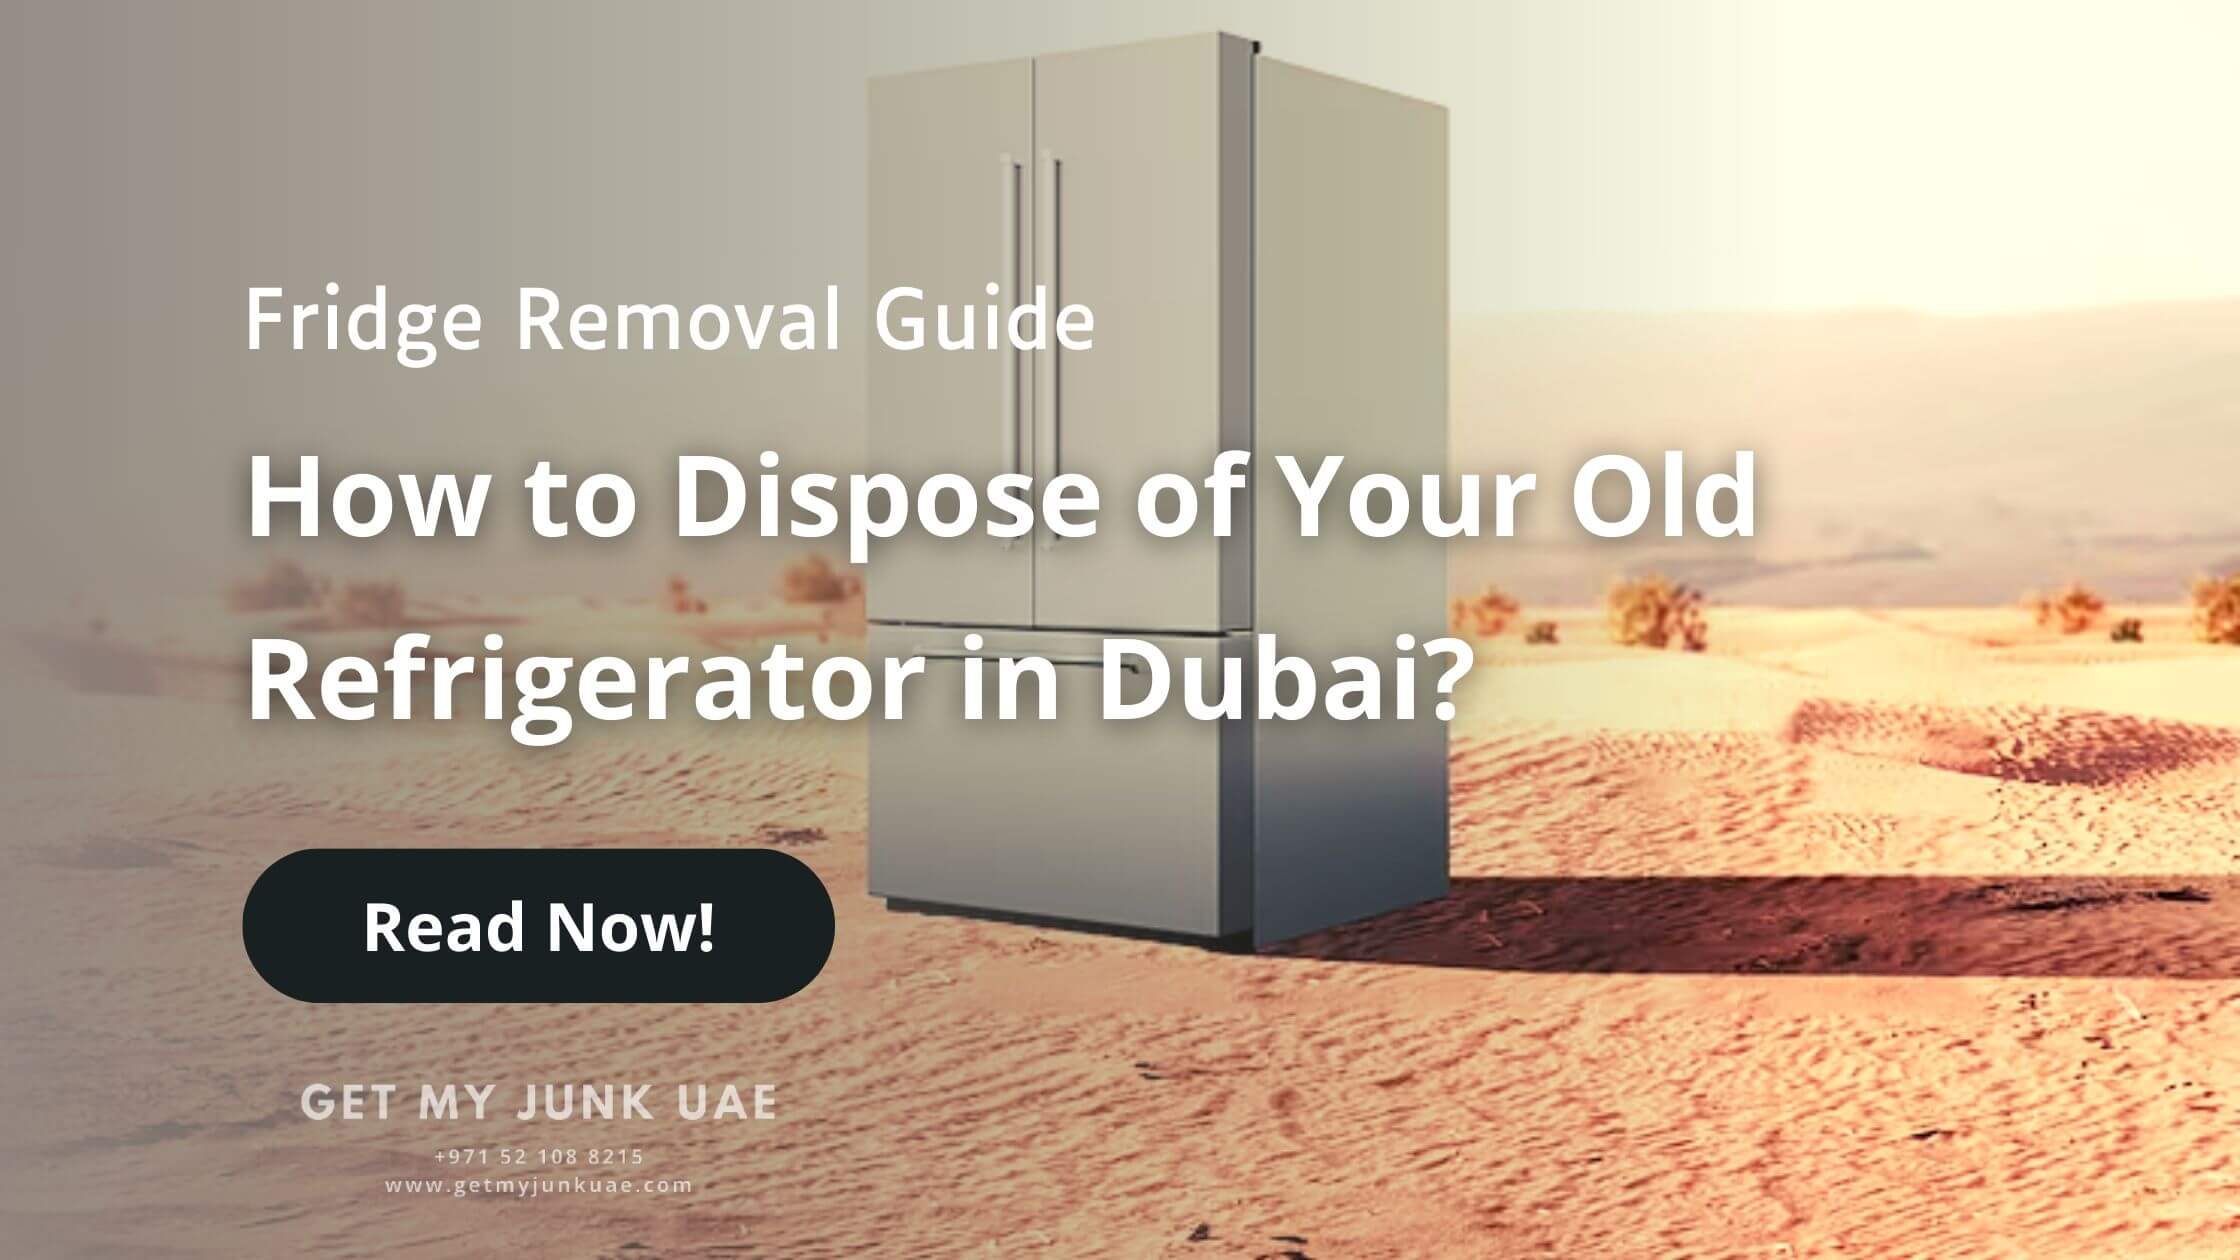 How to Dispose of Your Old Refrigerator in Dubai